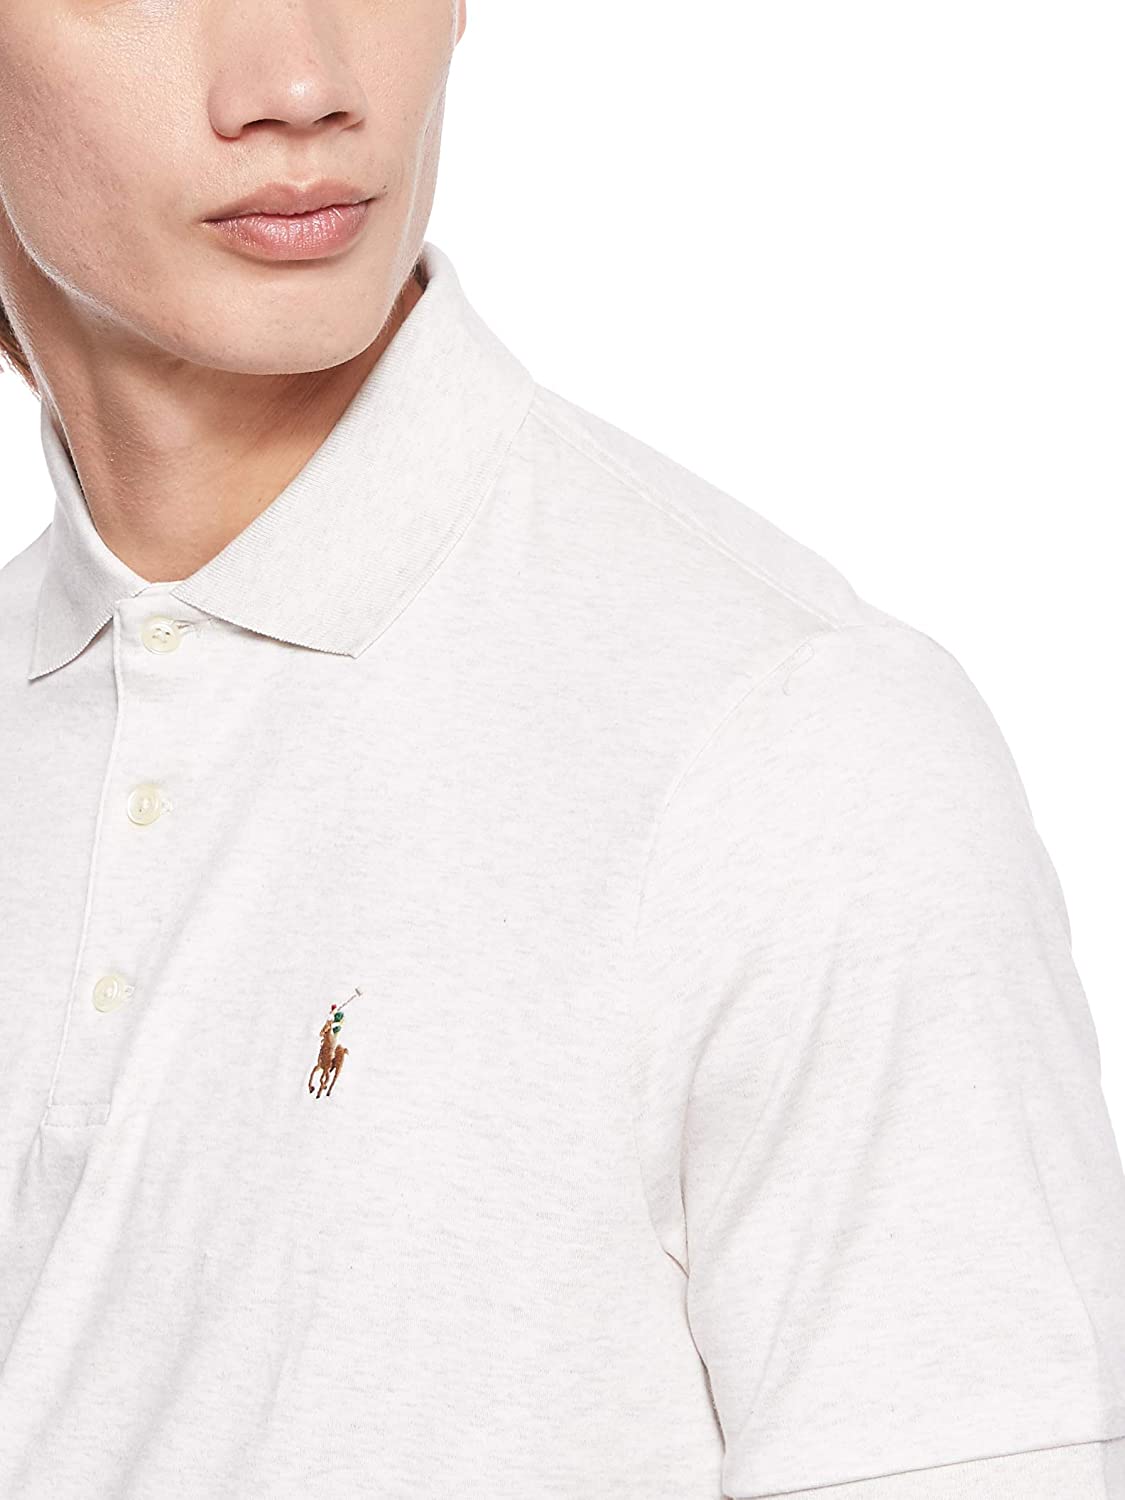 Classic-Fit Cotton Polo - image 3 of 6